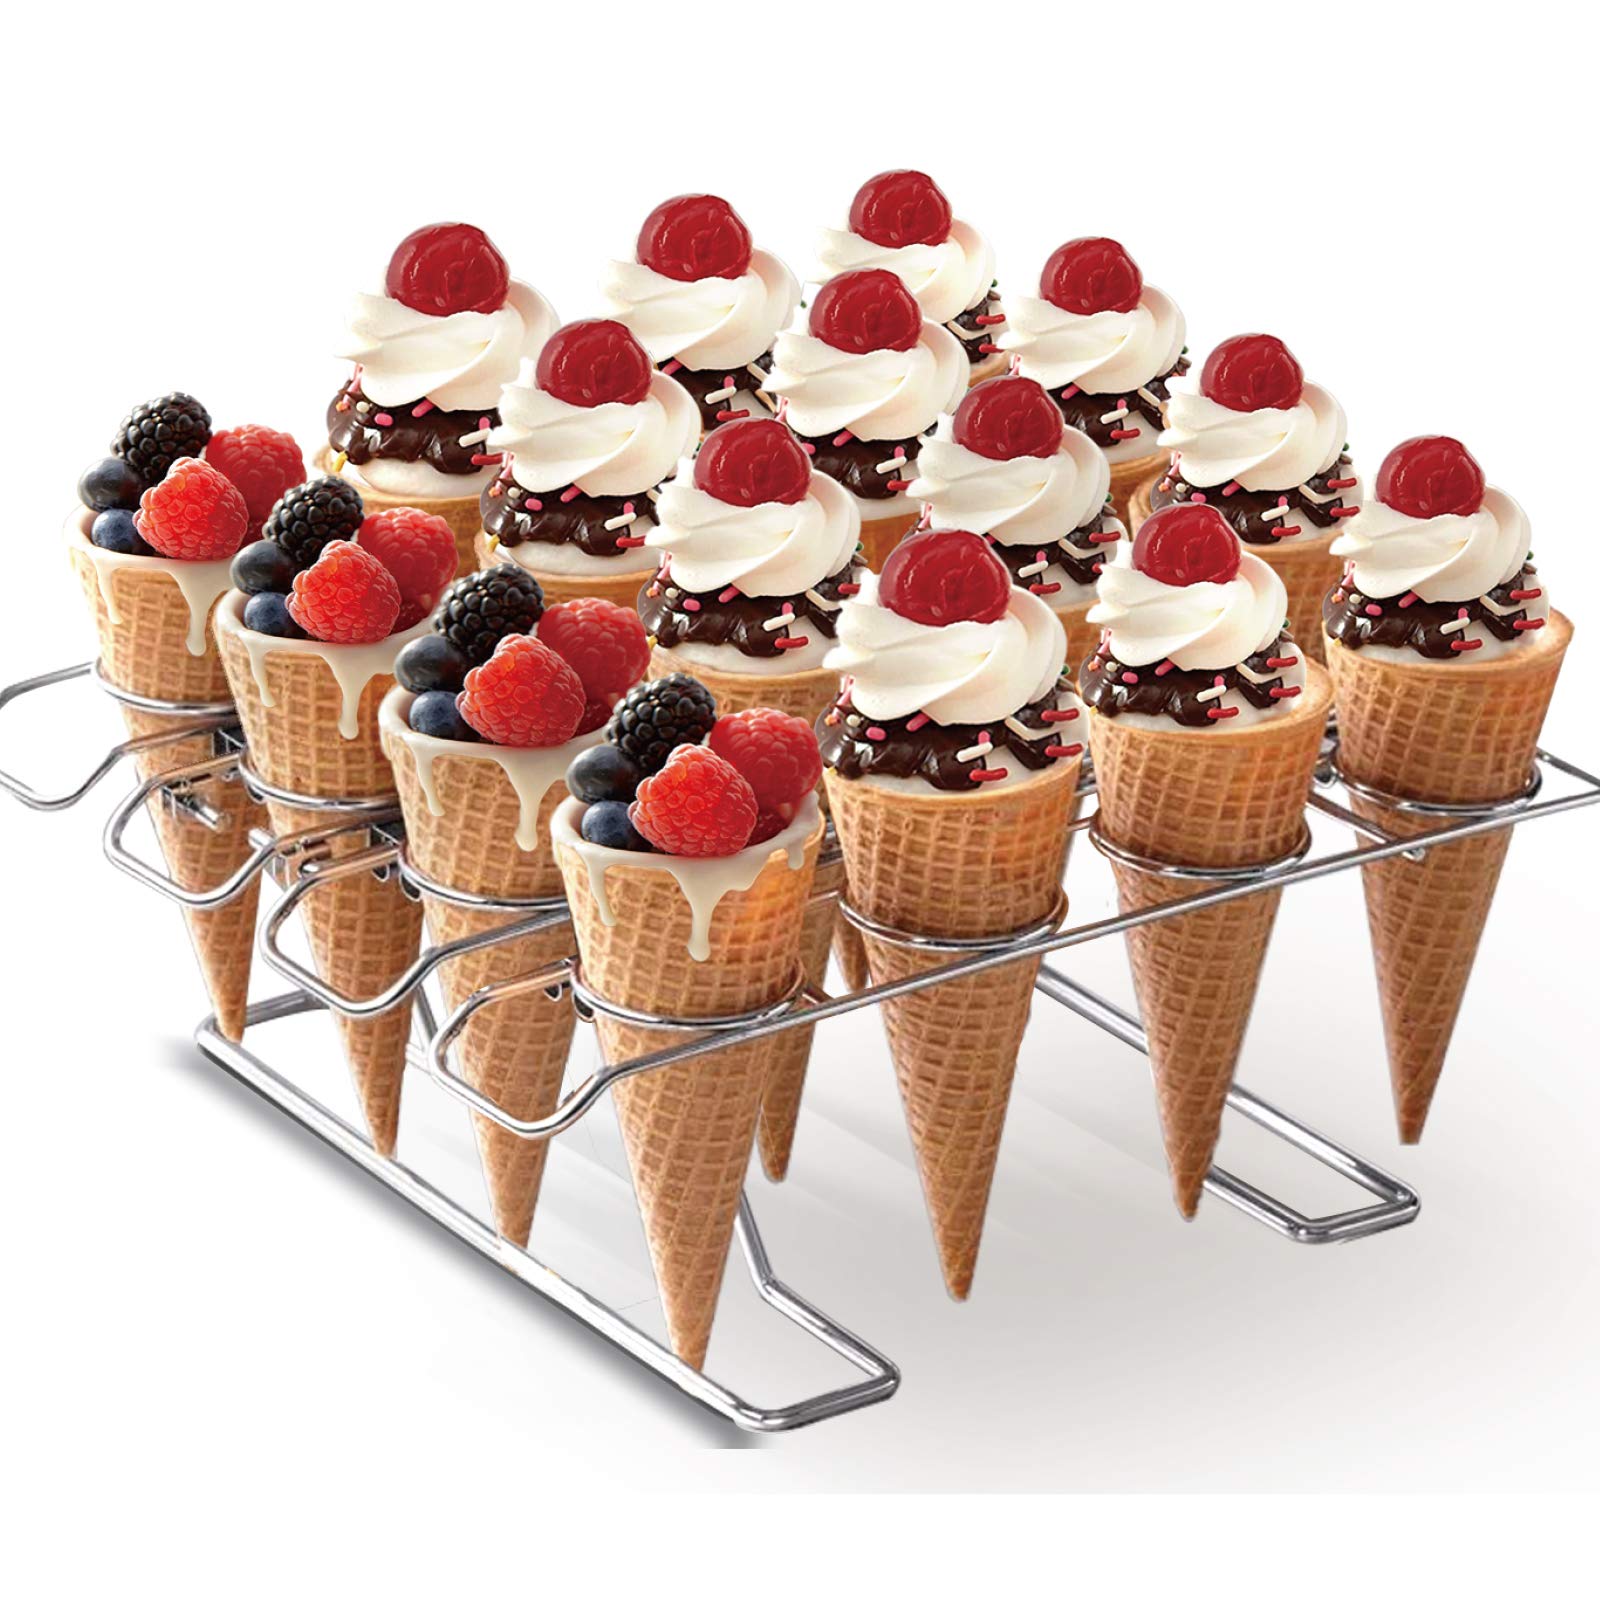 Newthinking Cupcake Cones Baking Rack, 16-Cavity Stainless Steel Ice Cream Cone Stand Holder Foldable Cake Decorating Pastry Tray Waffle Cones Holder for Baking, Cooling, Display